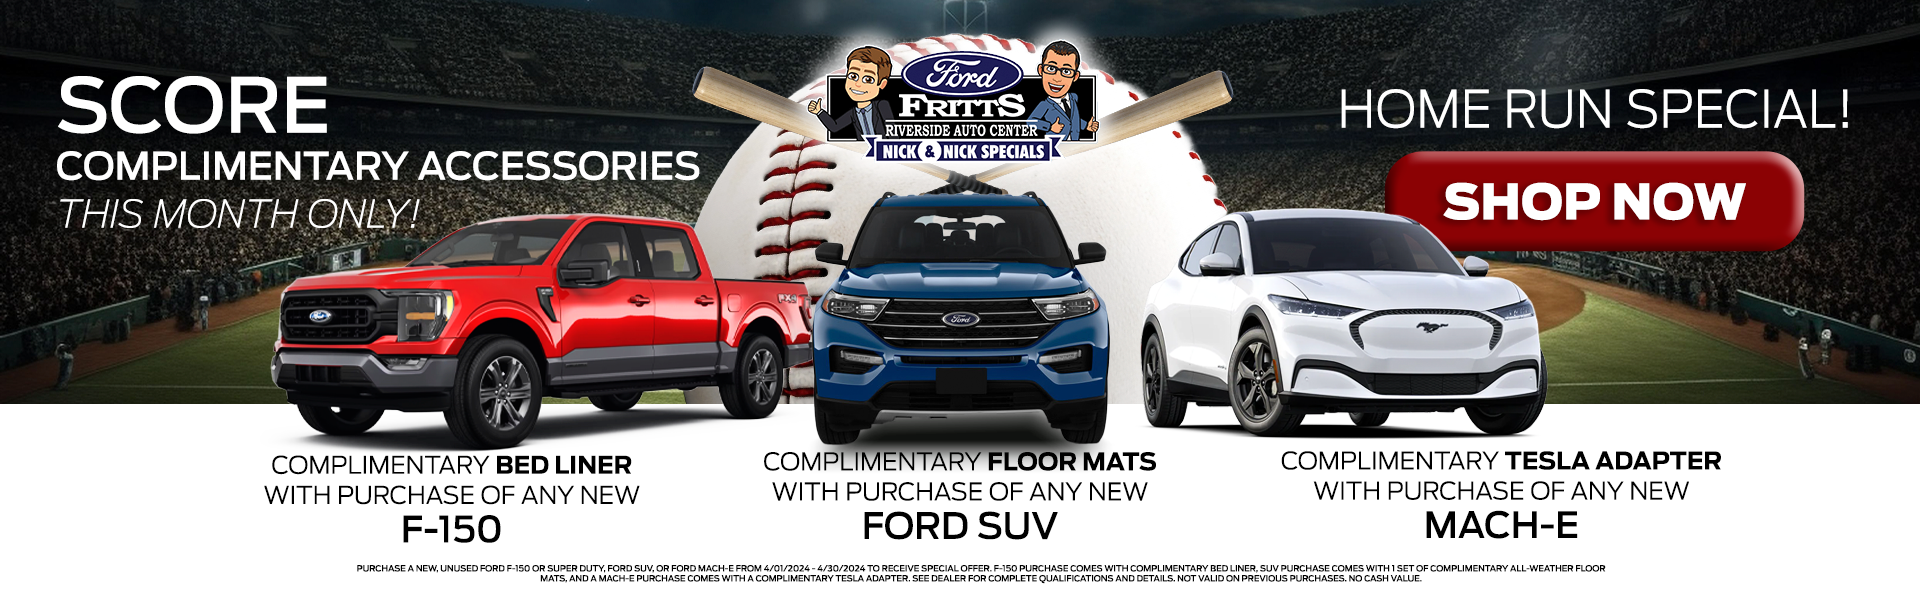 Score Complimentary Accessories Fritts Ford 